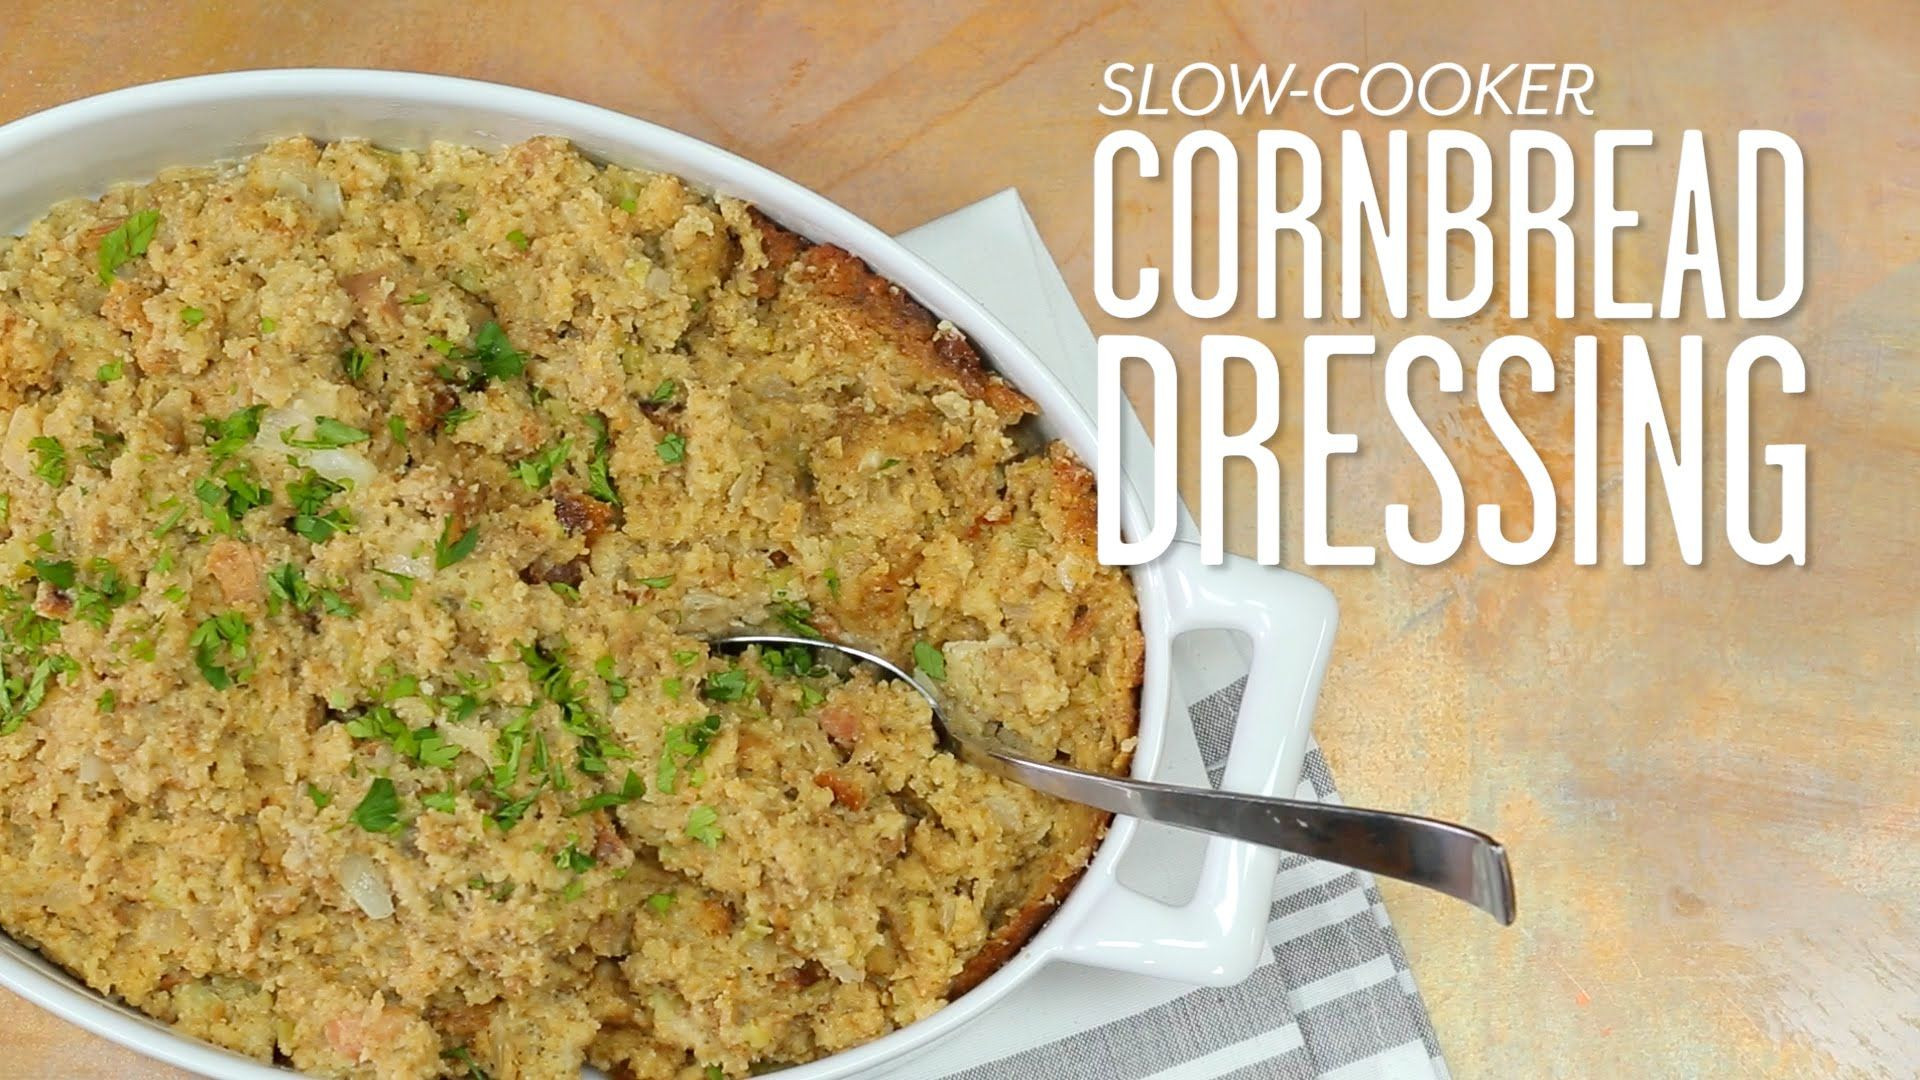 Cornbread Dressing Southern Living
 How To Make Slow Cooker Cornbread Dressing